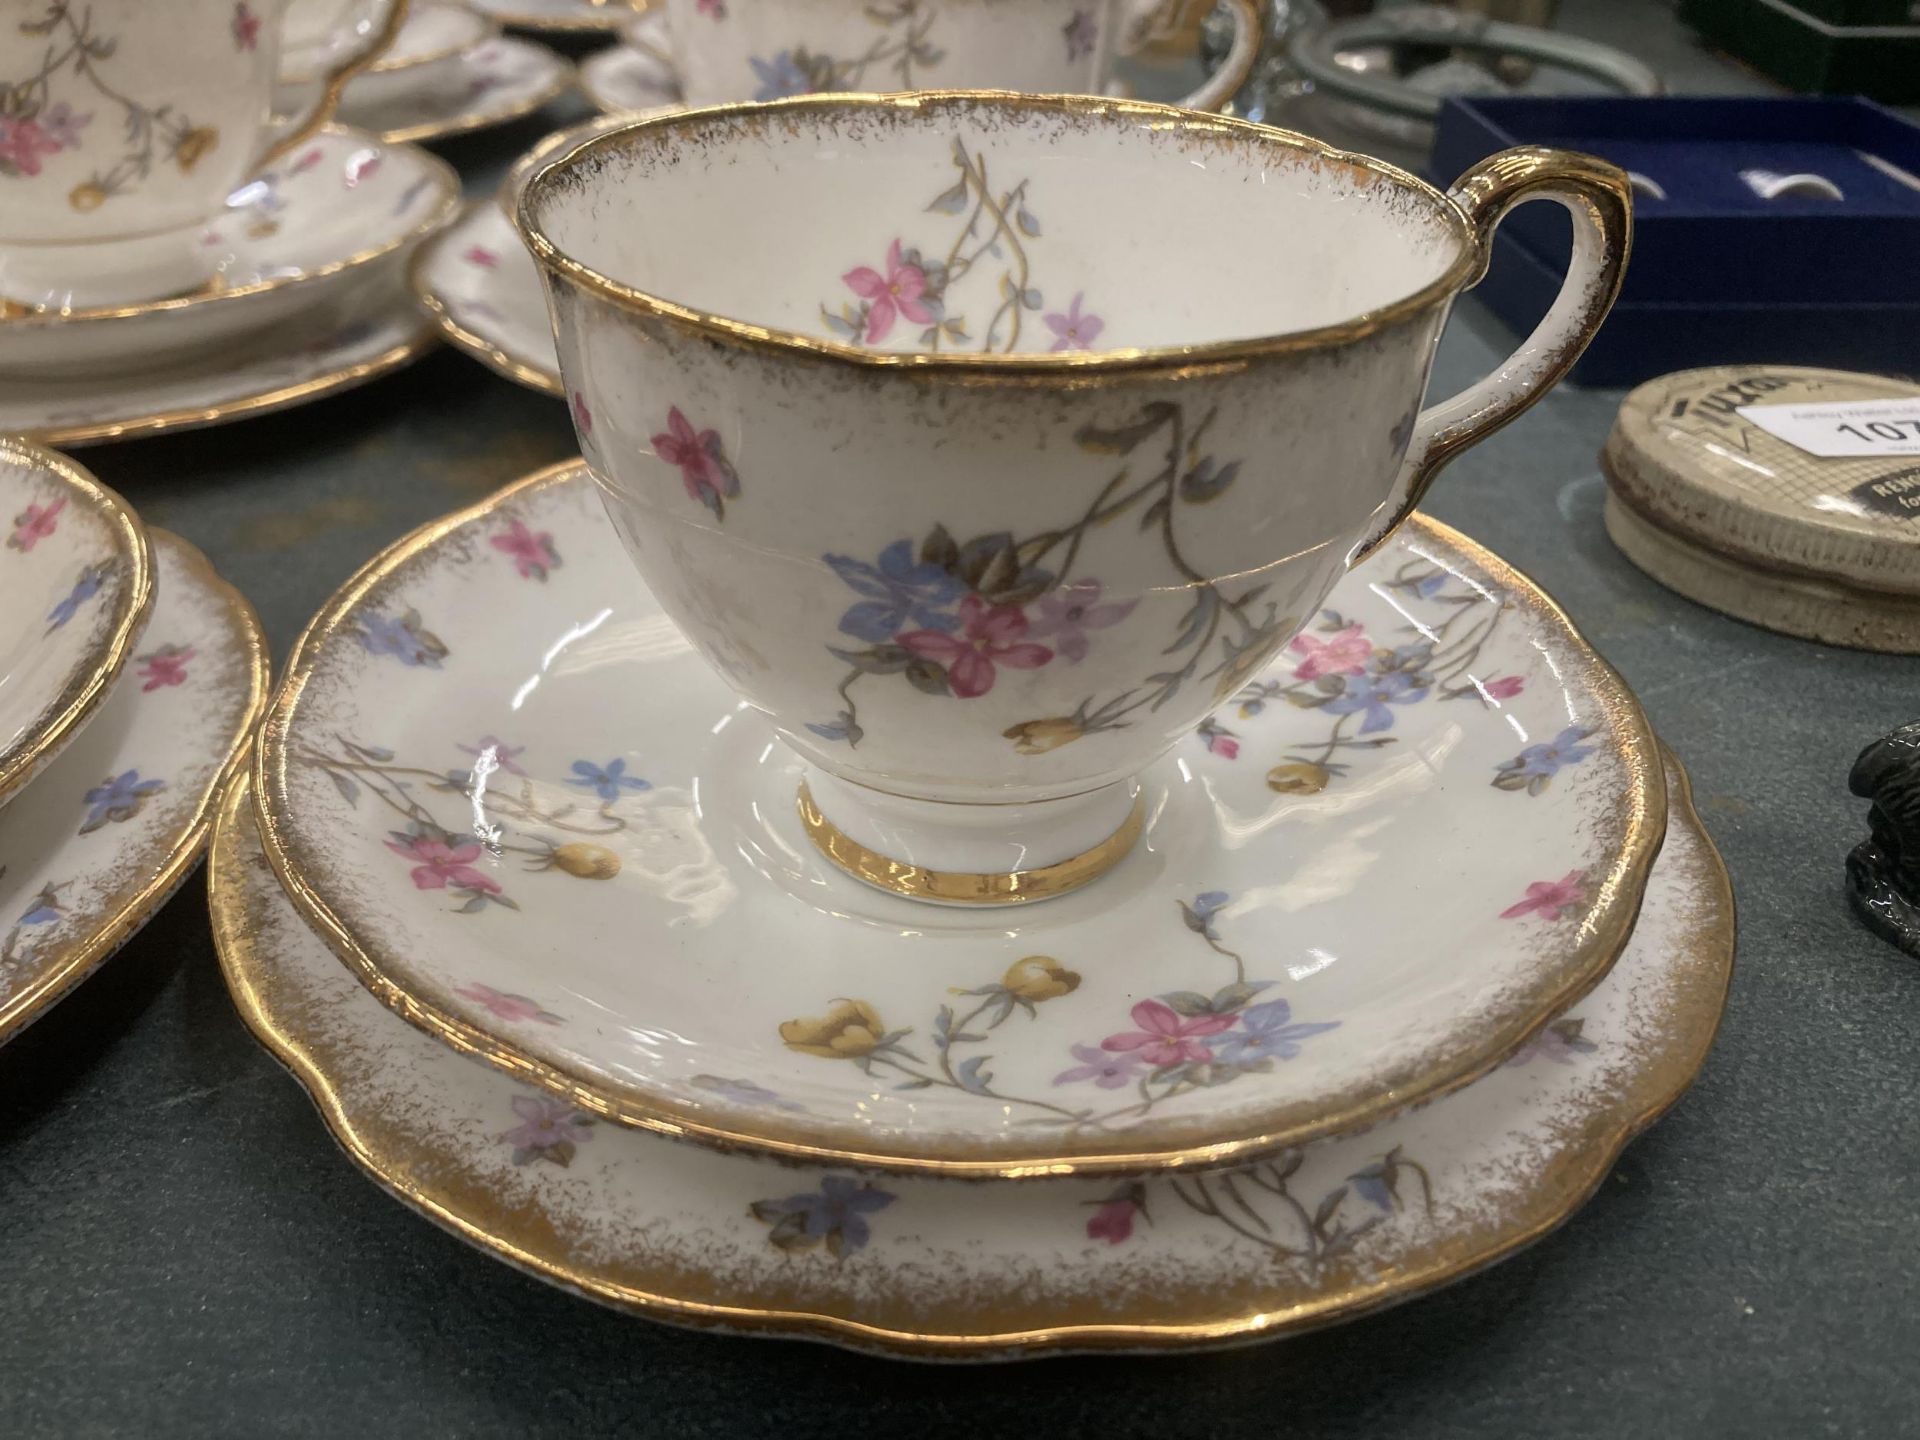 A ROYAL STAFFORD 'VIOLETS POMPADOUR' TEASET TO INCLUDE A CAKE PLATE, CUPS, SAUCERS, SIDE PLATES, - Image 2 of 4